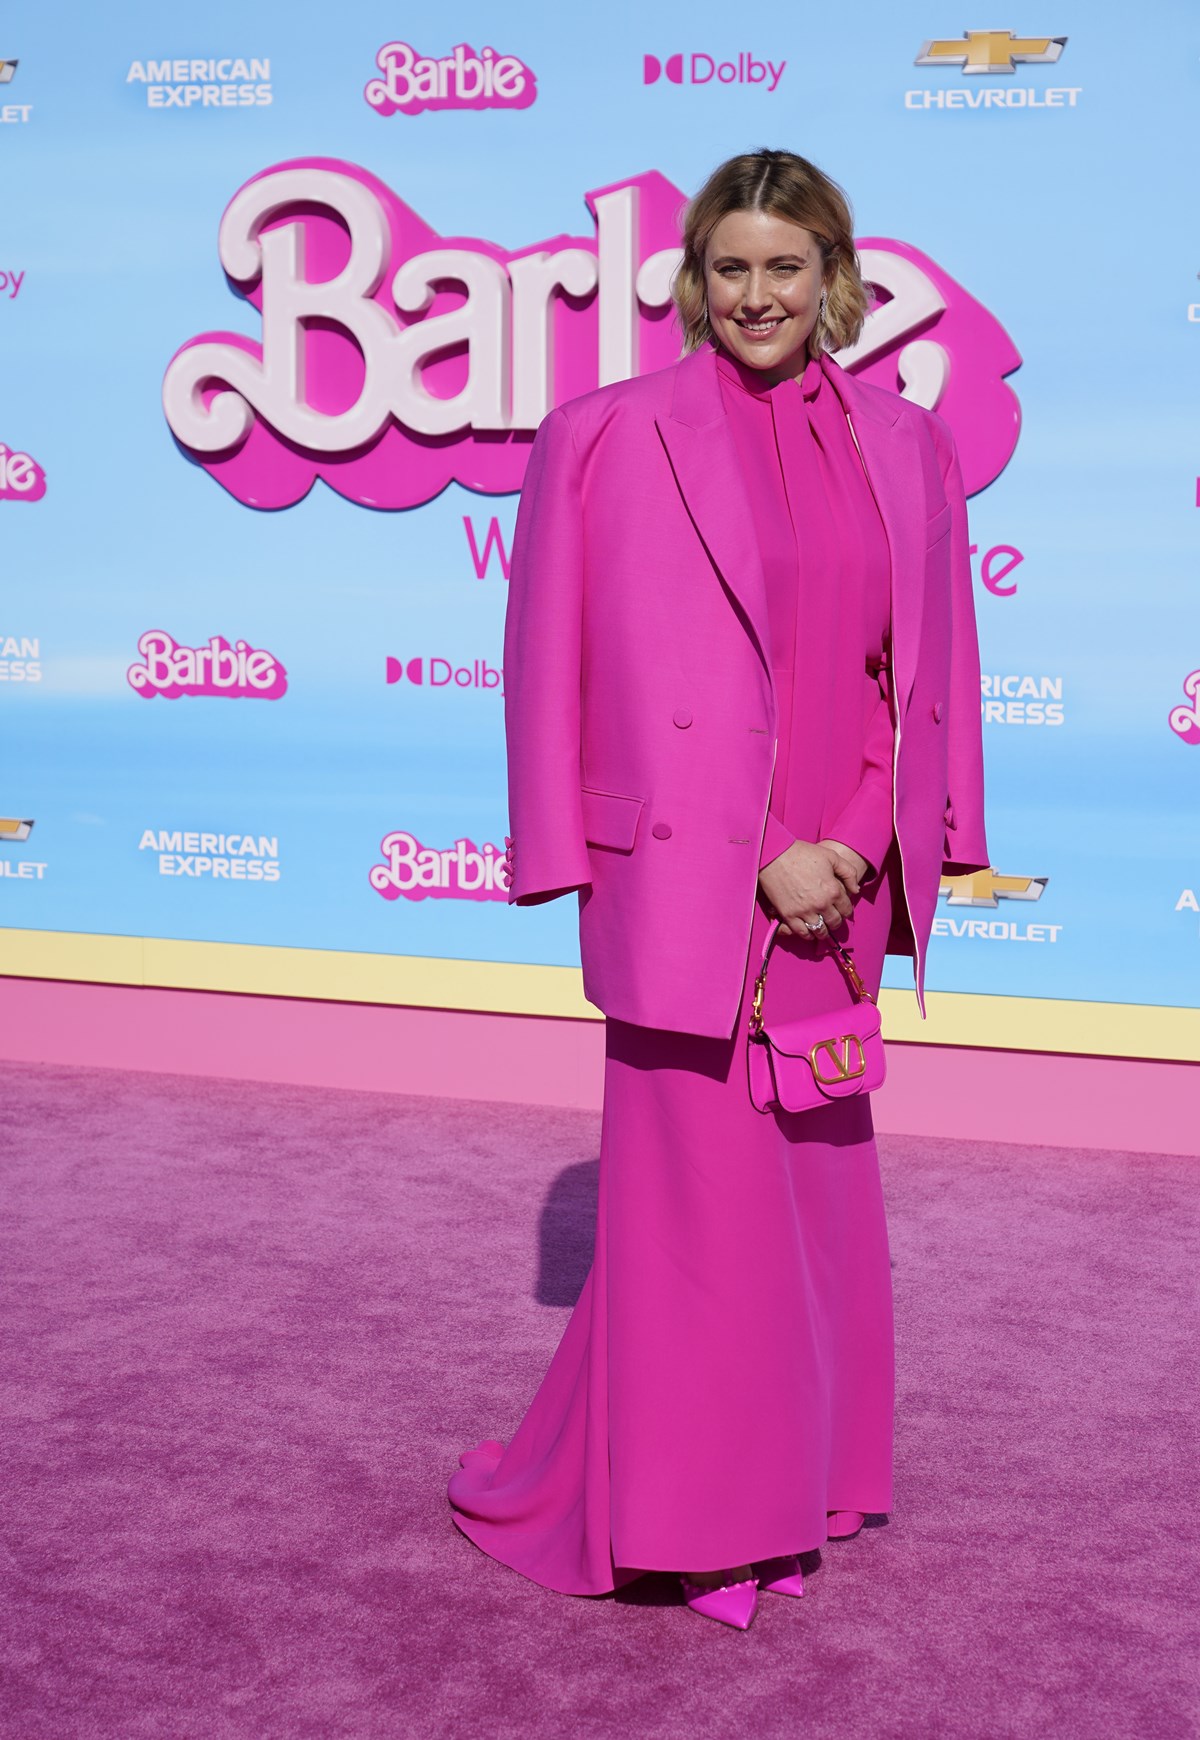 It’s Barbie’s world: All the best looks from the world premiere ...